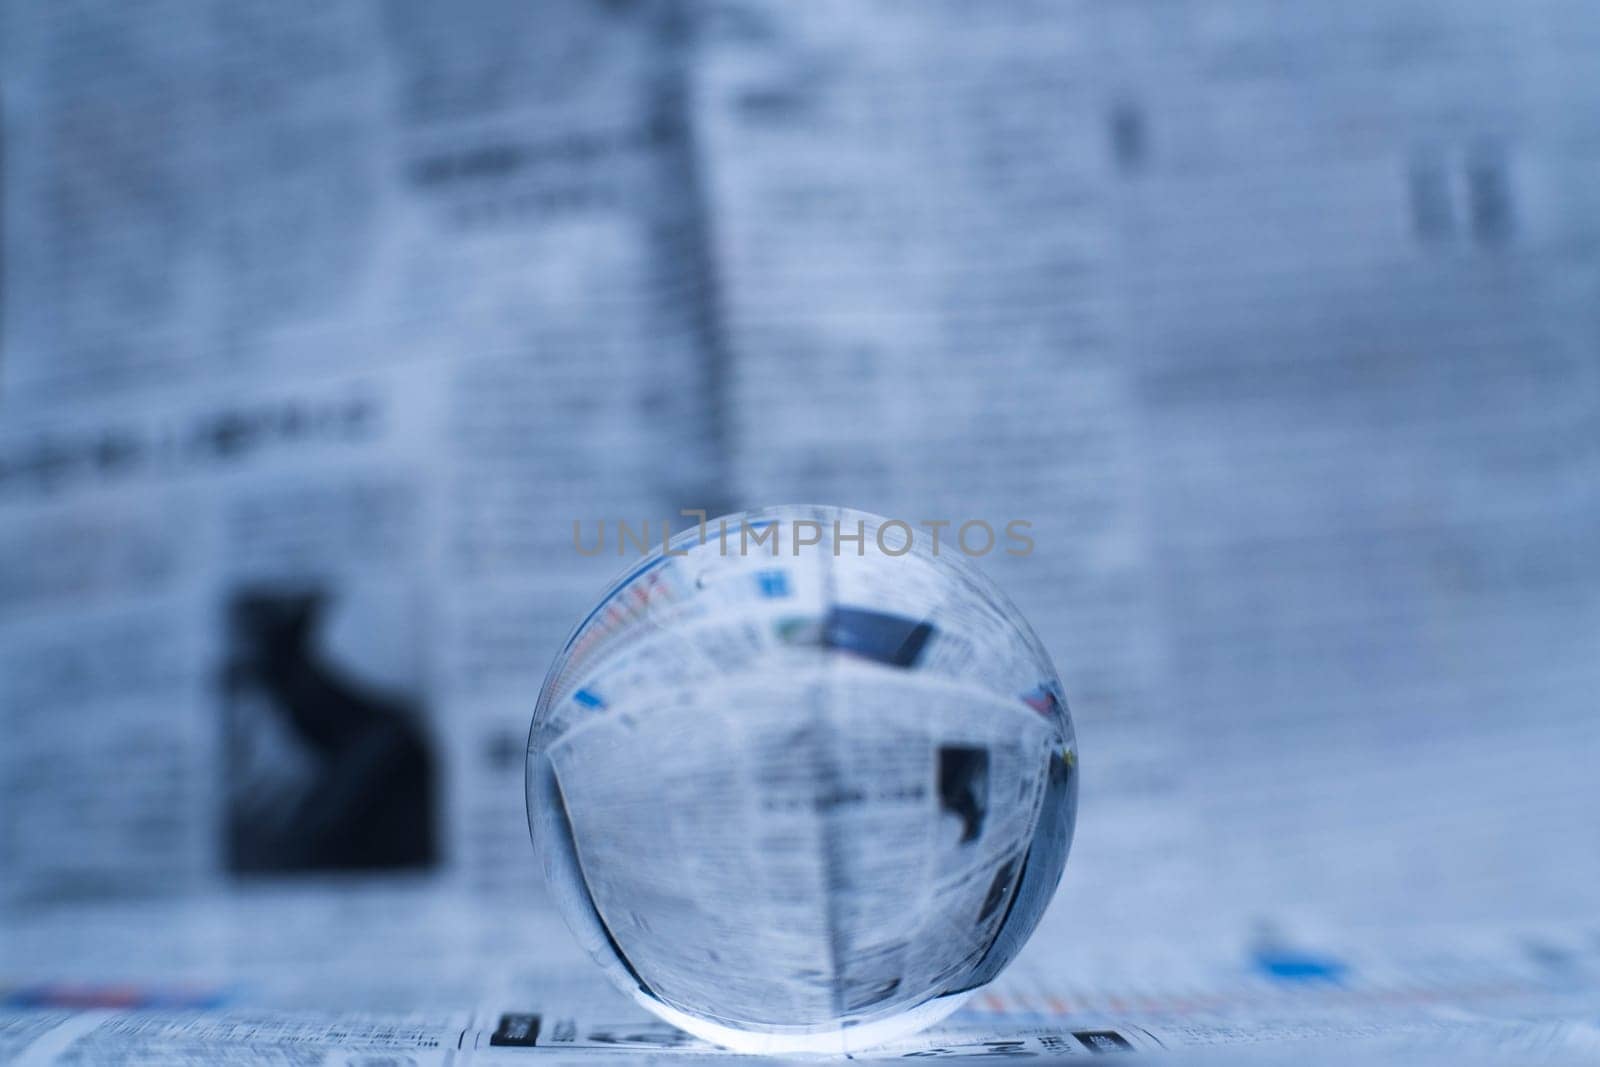 A glass globe reveals the letters inside, with a newspaper in the background.